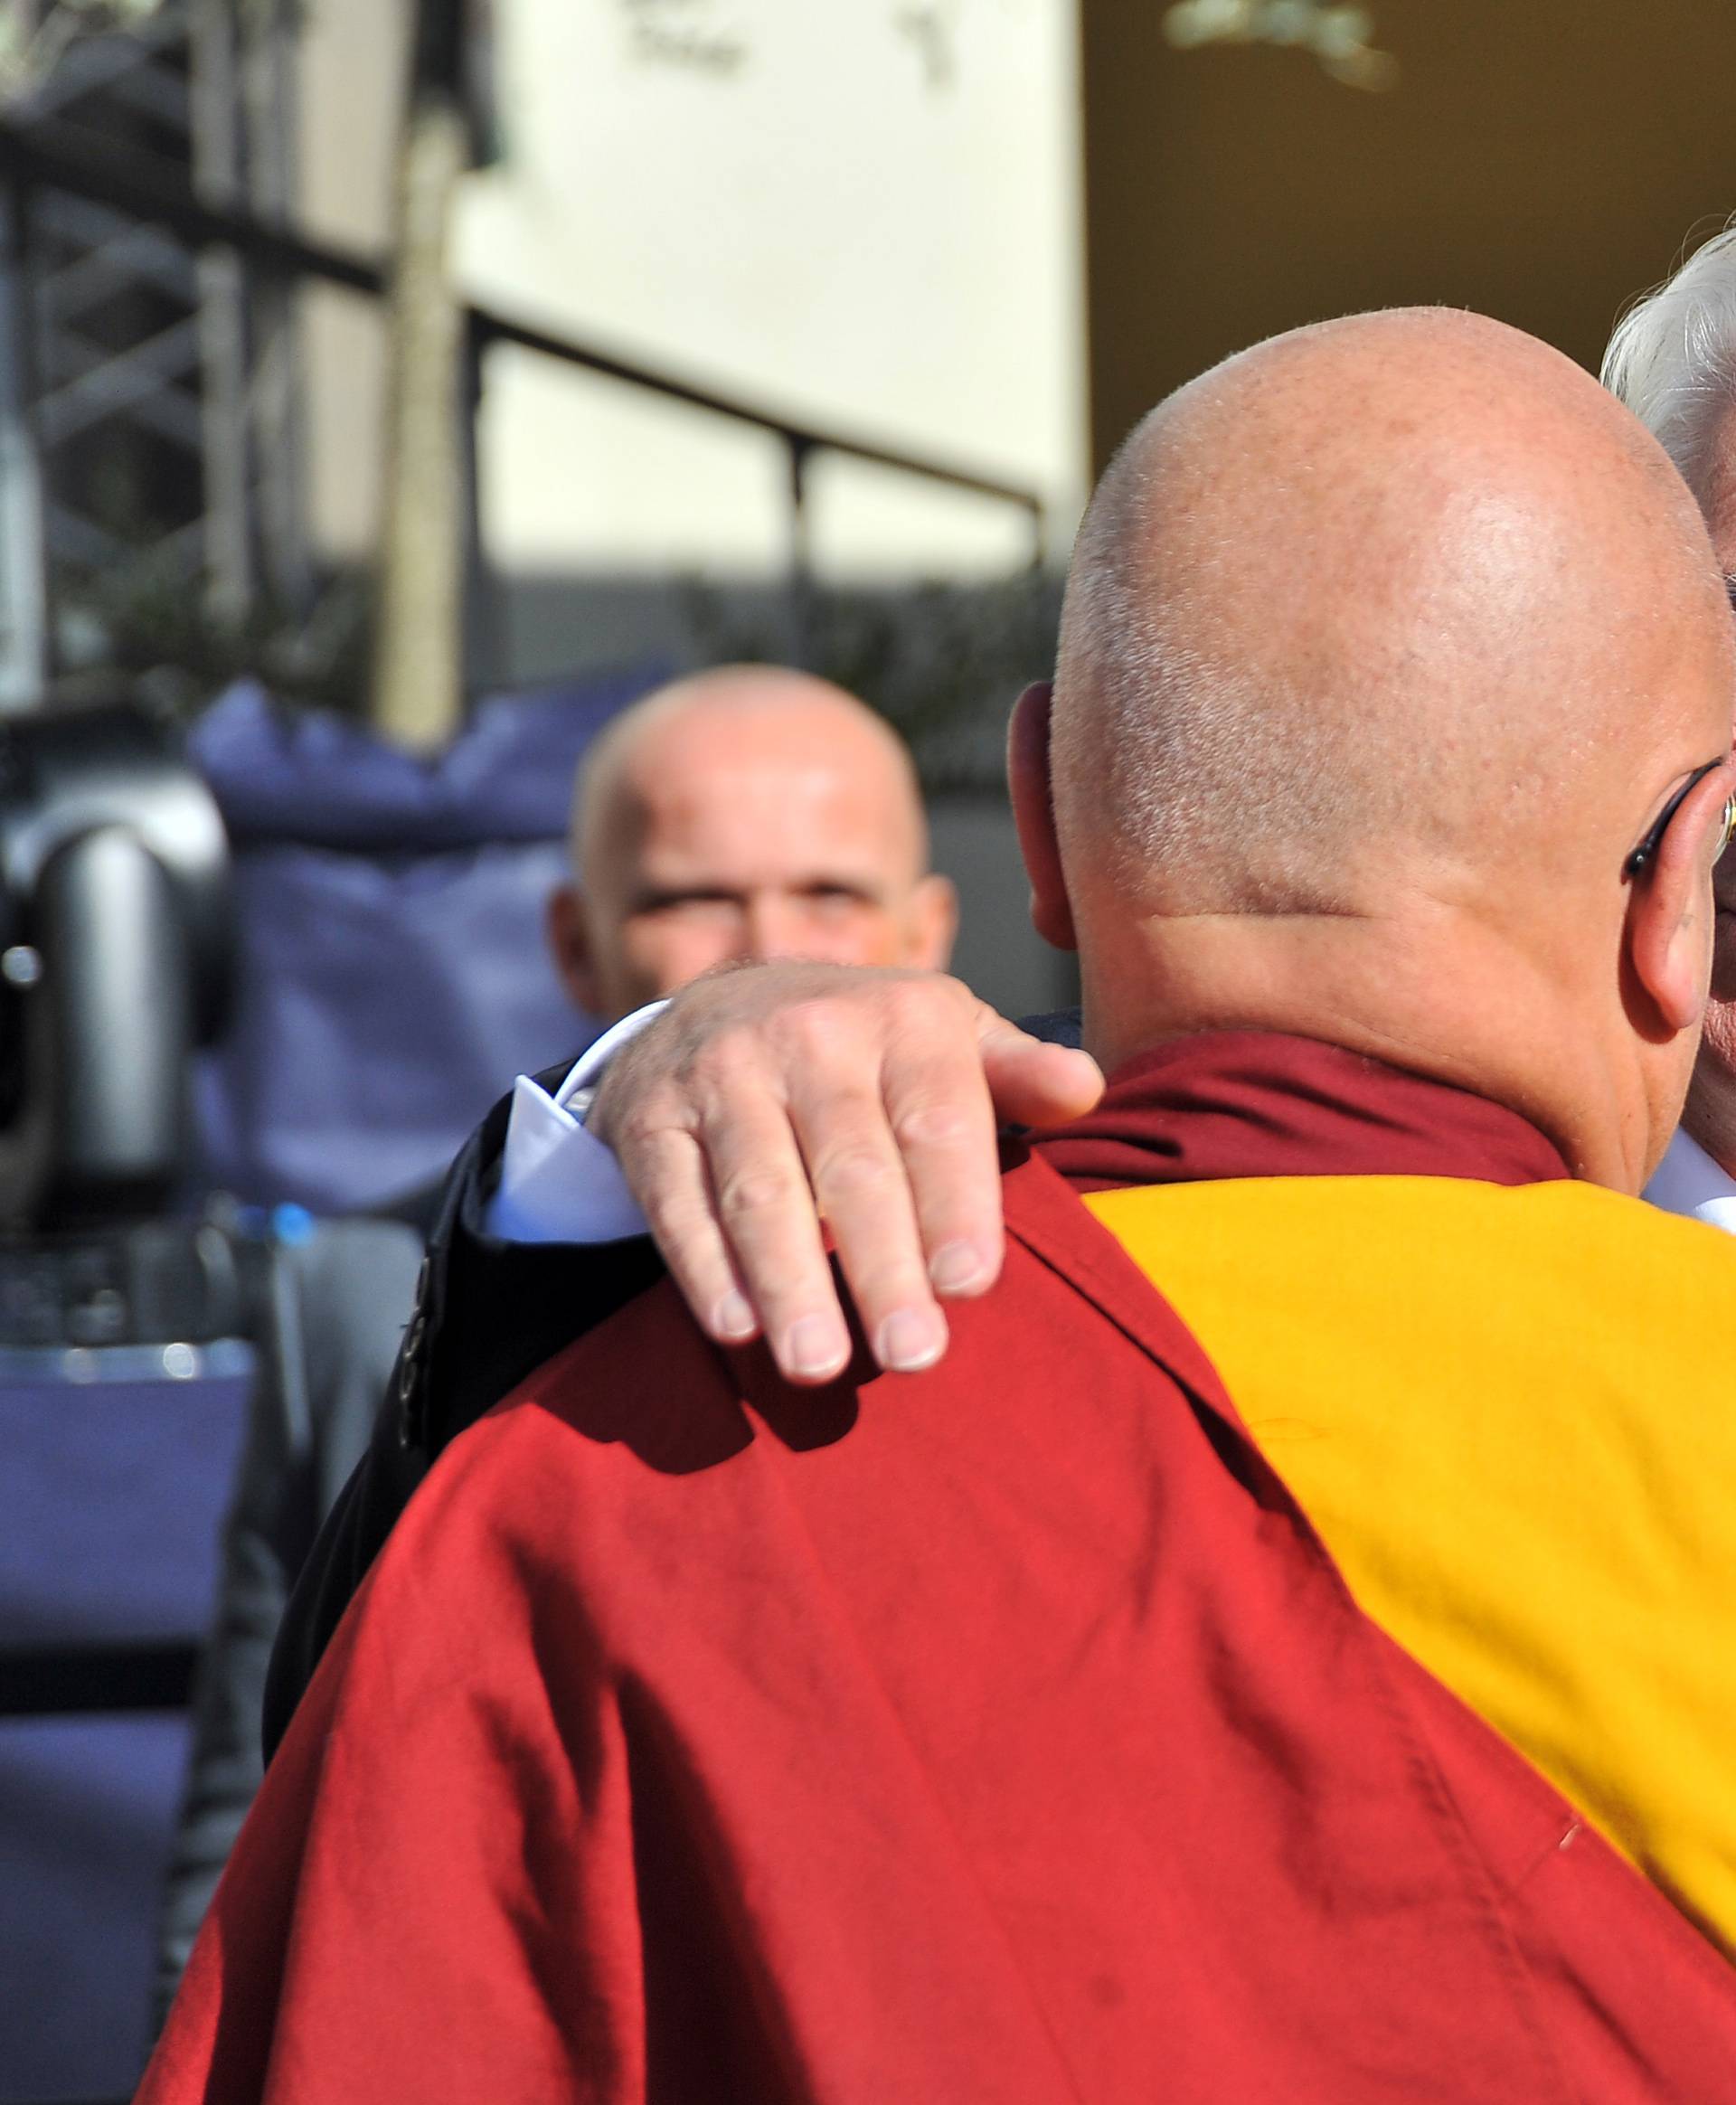 Pisa, The Dalai Lama (accompanied by Richard Gere) meets the public and the schools